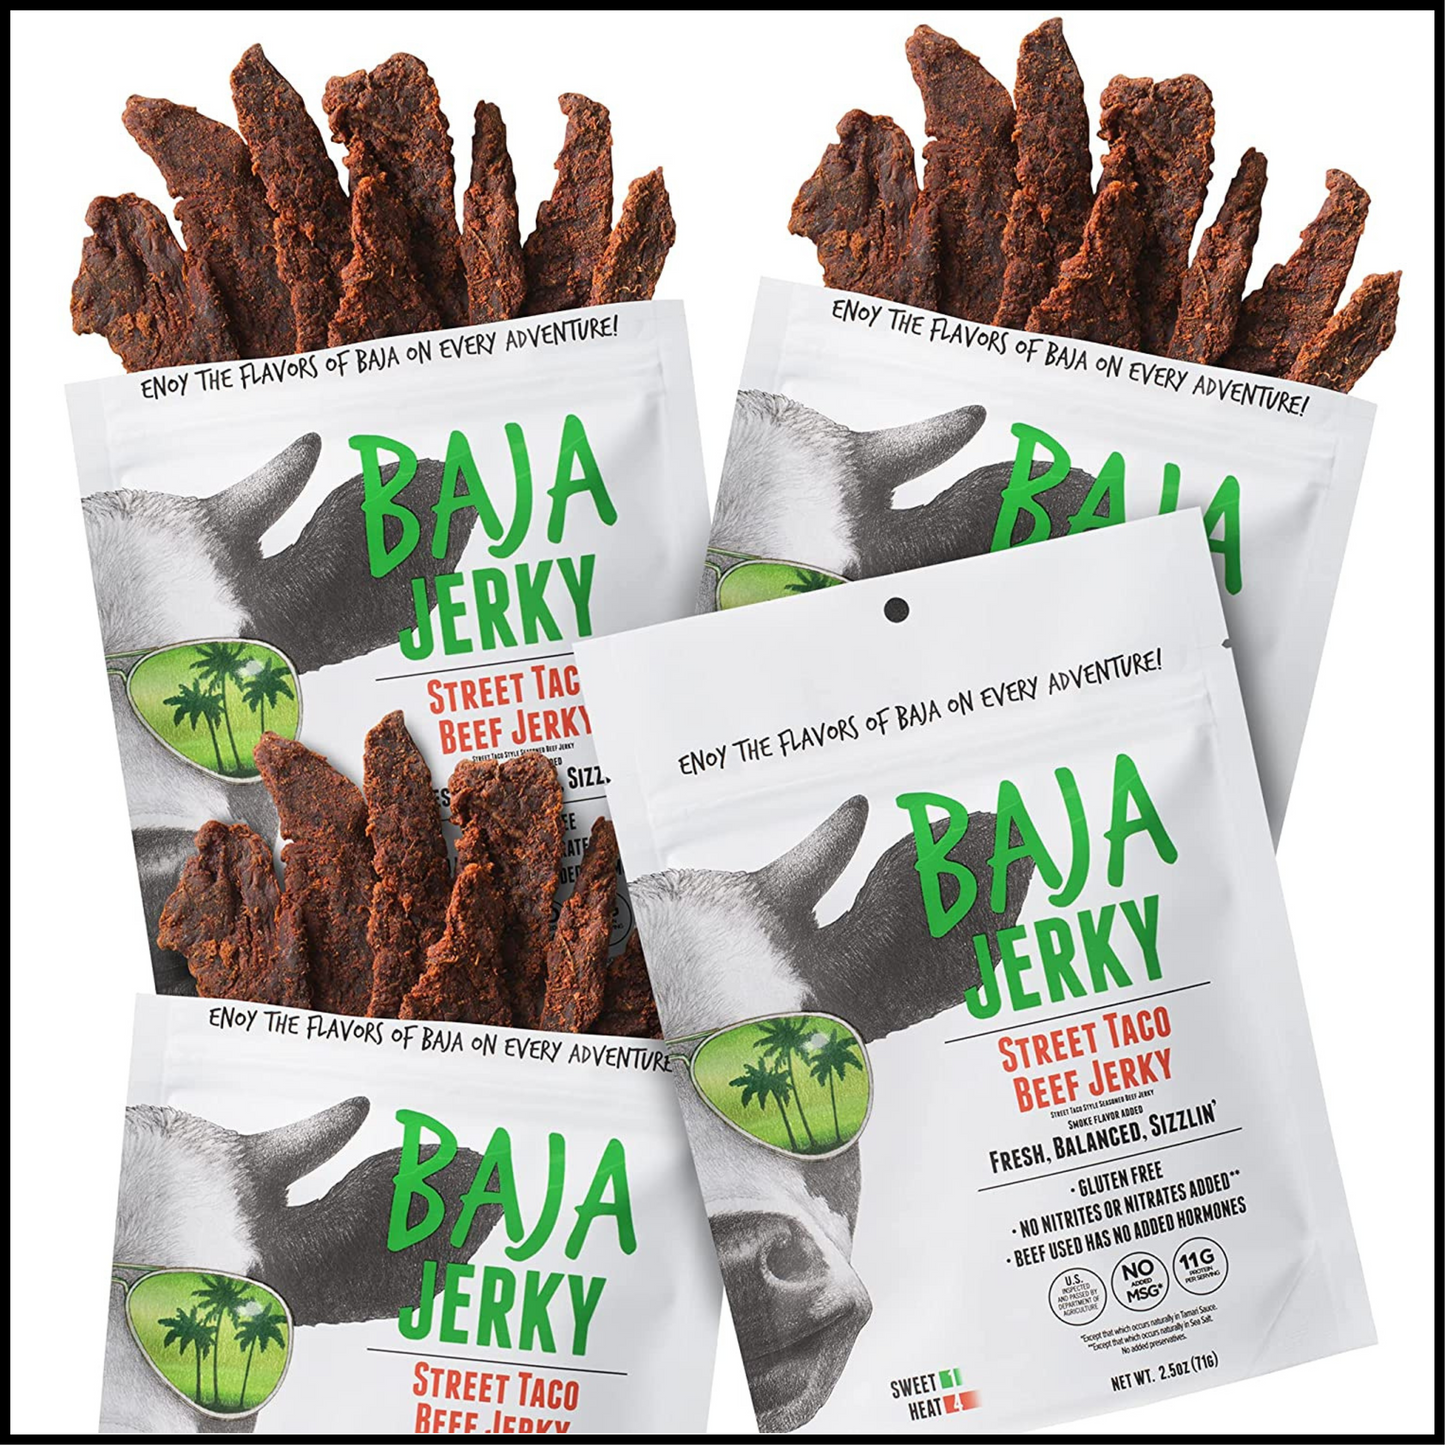 100% All Natural Beef Jerky No Nitrates or Added Hormones Street Taco | 2.5 Oz Bags Pack of 4